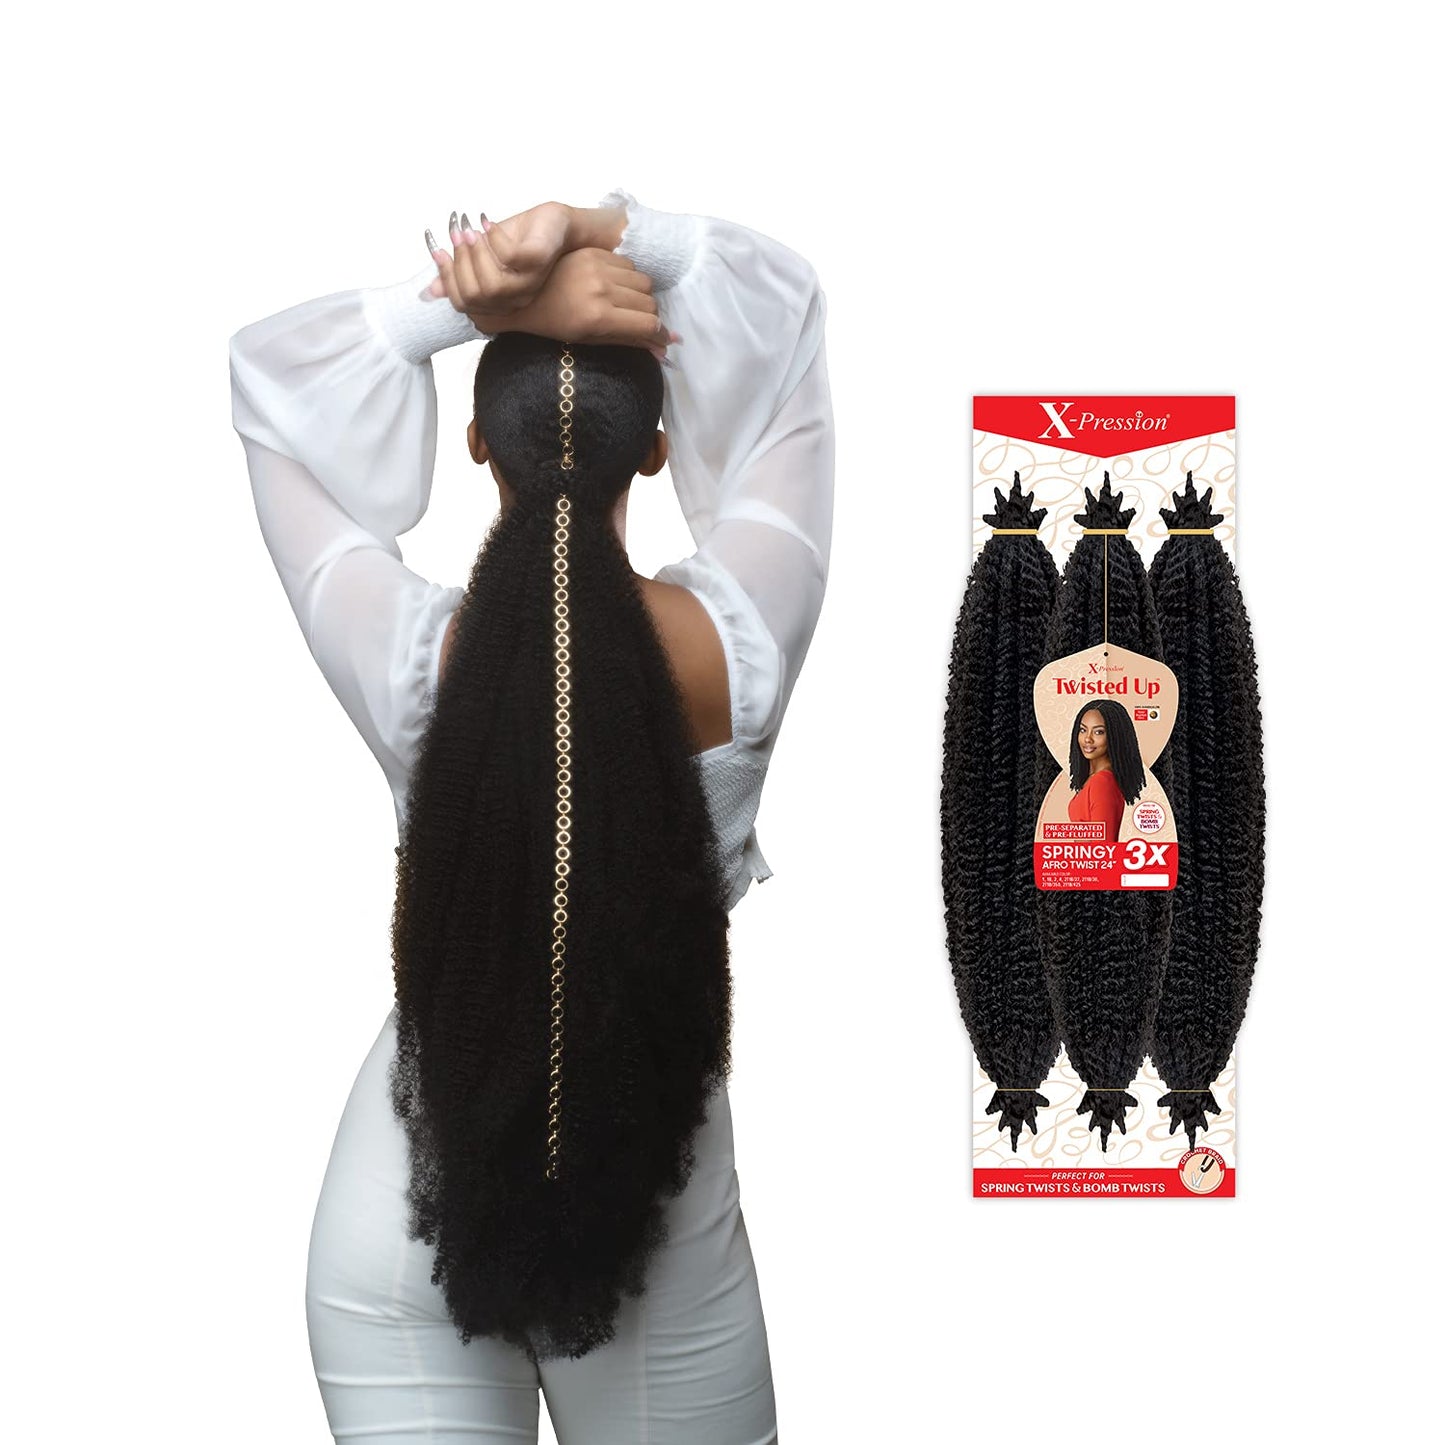 Outre Crochet Braids X-Pression Twisted Up 3X Springy Afro Twist 24" - VIP Extensions